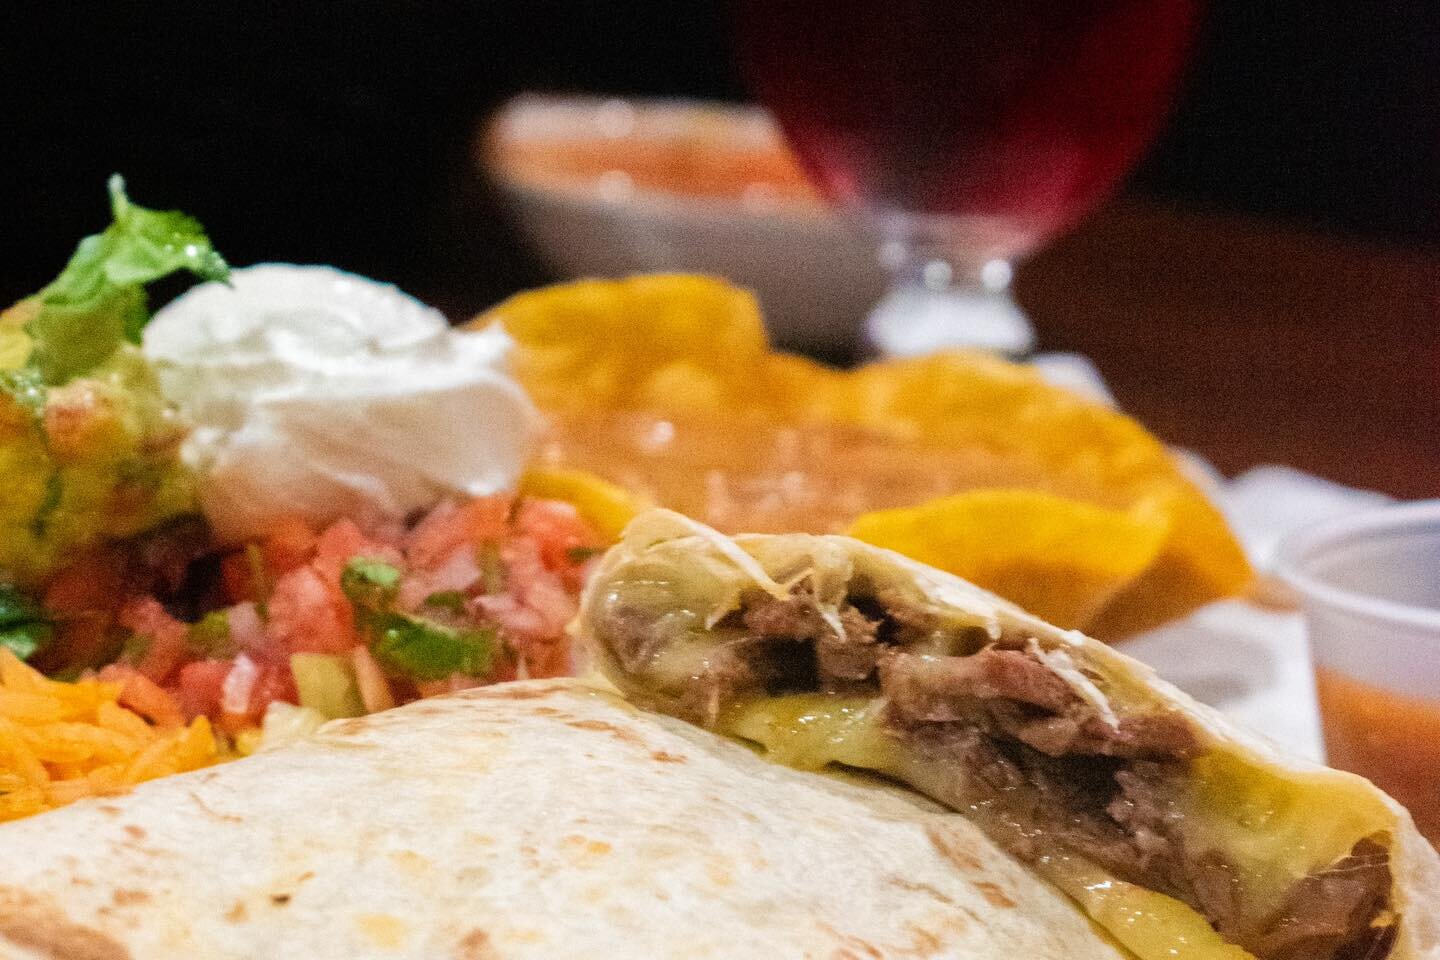 Treat your cravings with our delicious steak quesadilla 🔥🇲🇽
.
.
.
#bostonfoodies #southshorema #MexicanEats #AuthenticMexican #stoughtonma #MassachusettsEats